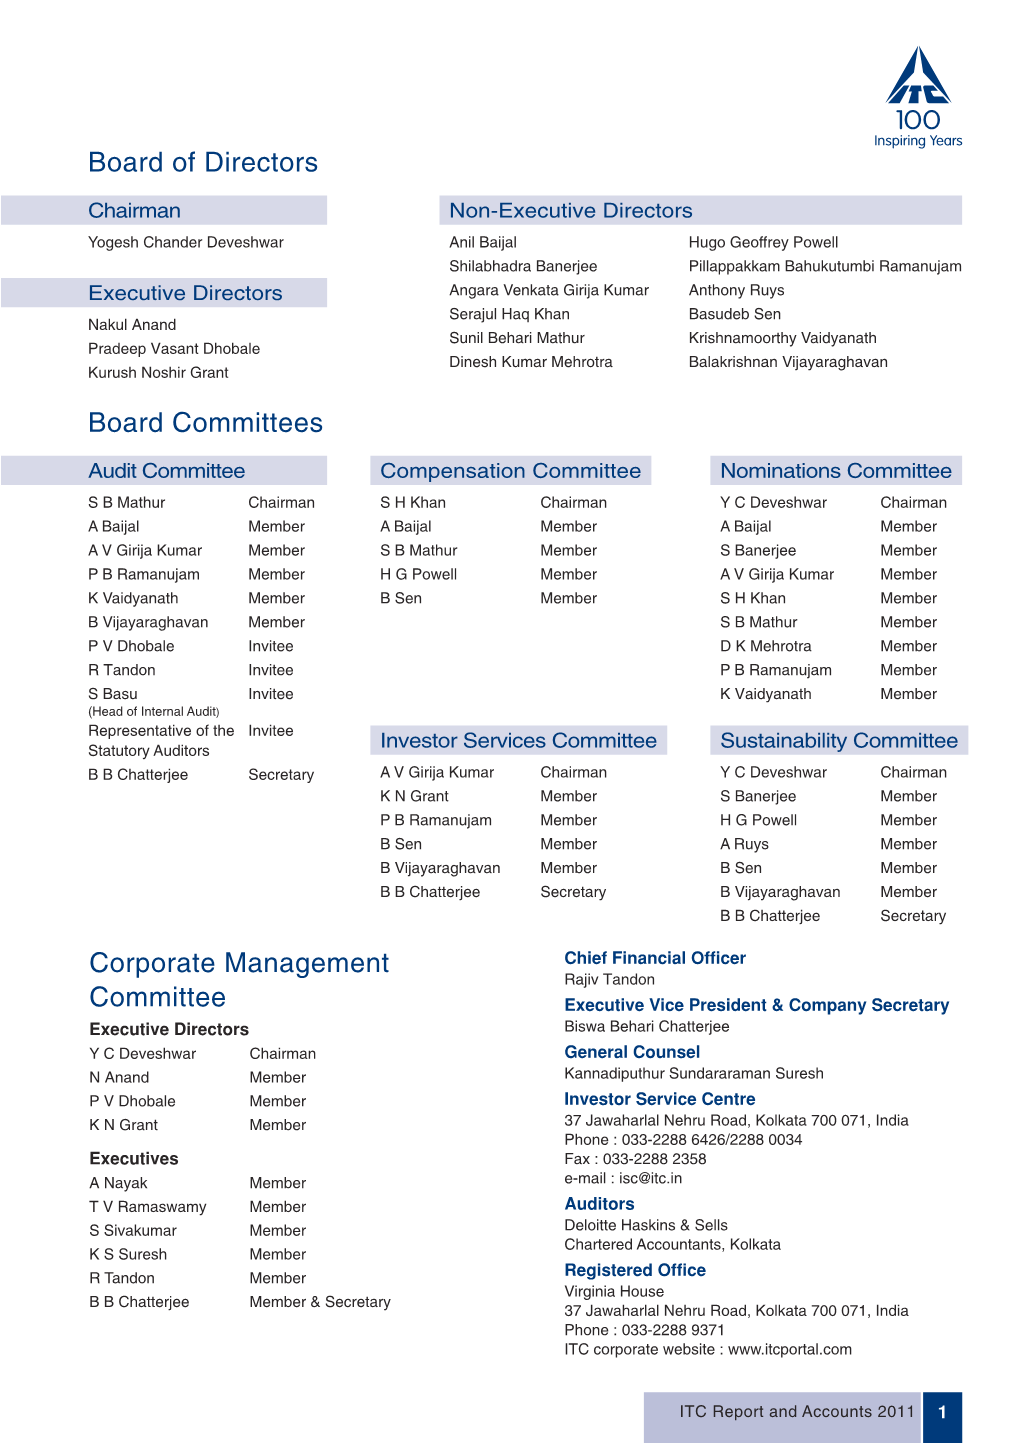 Corporate Management Committee Board Committees Board of Directors